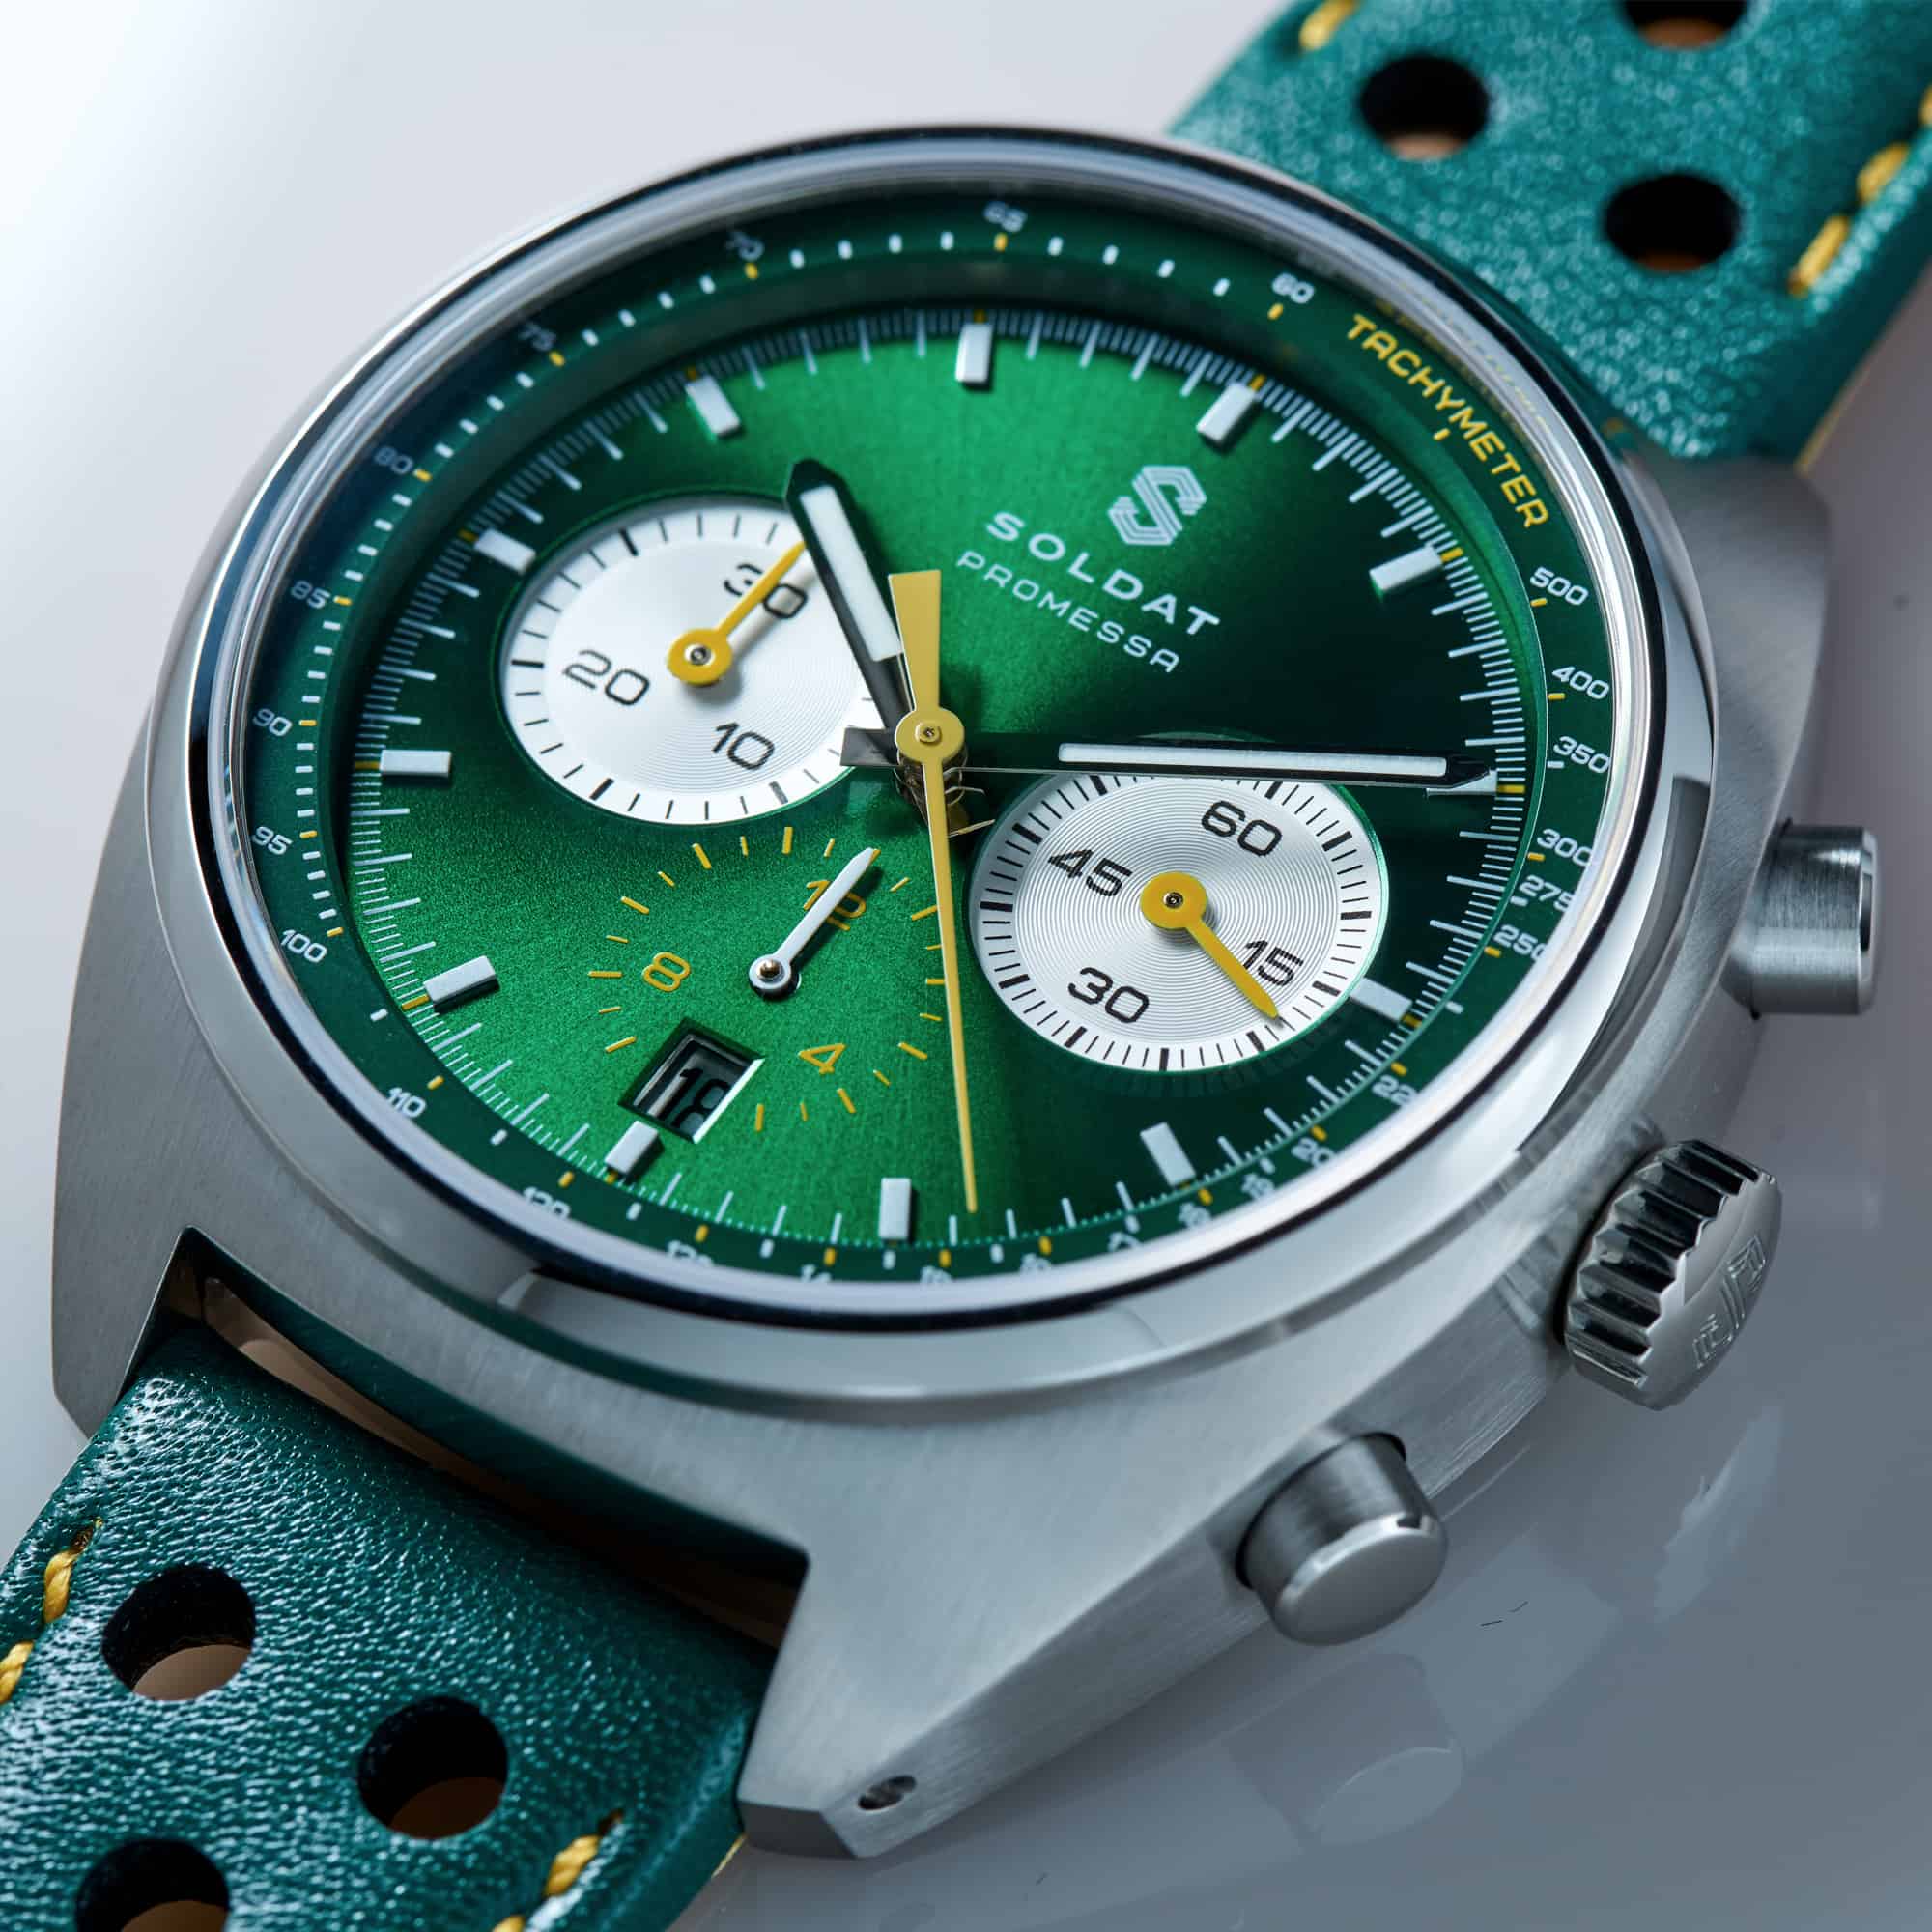 Worn & Wound - The Soldat Promessa Powers Vintage-Cool with Seiko's NE 88  Chronograph